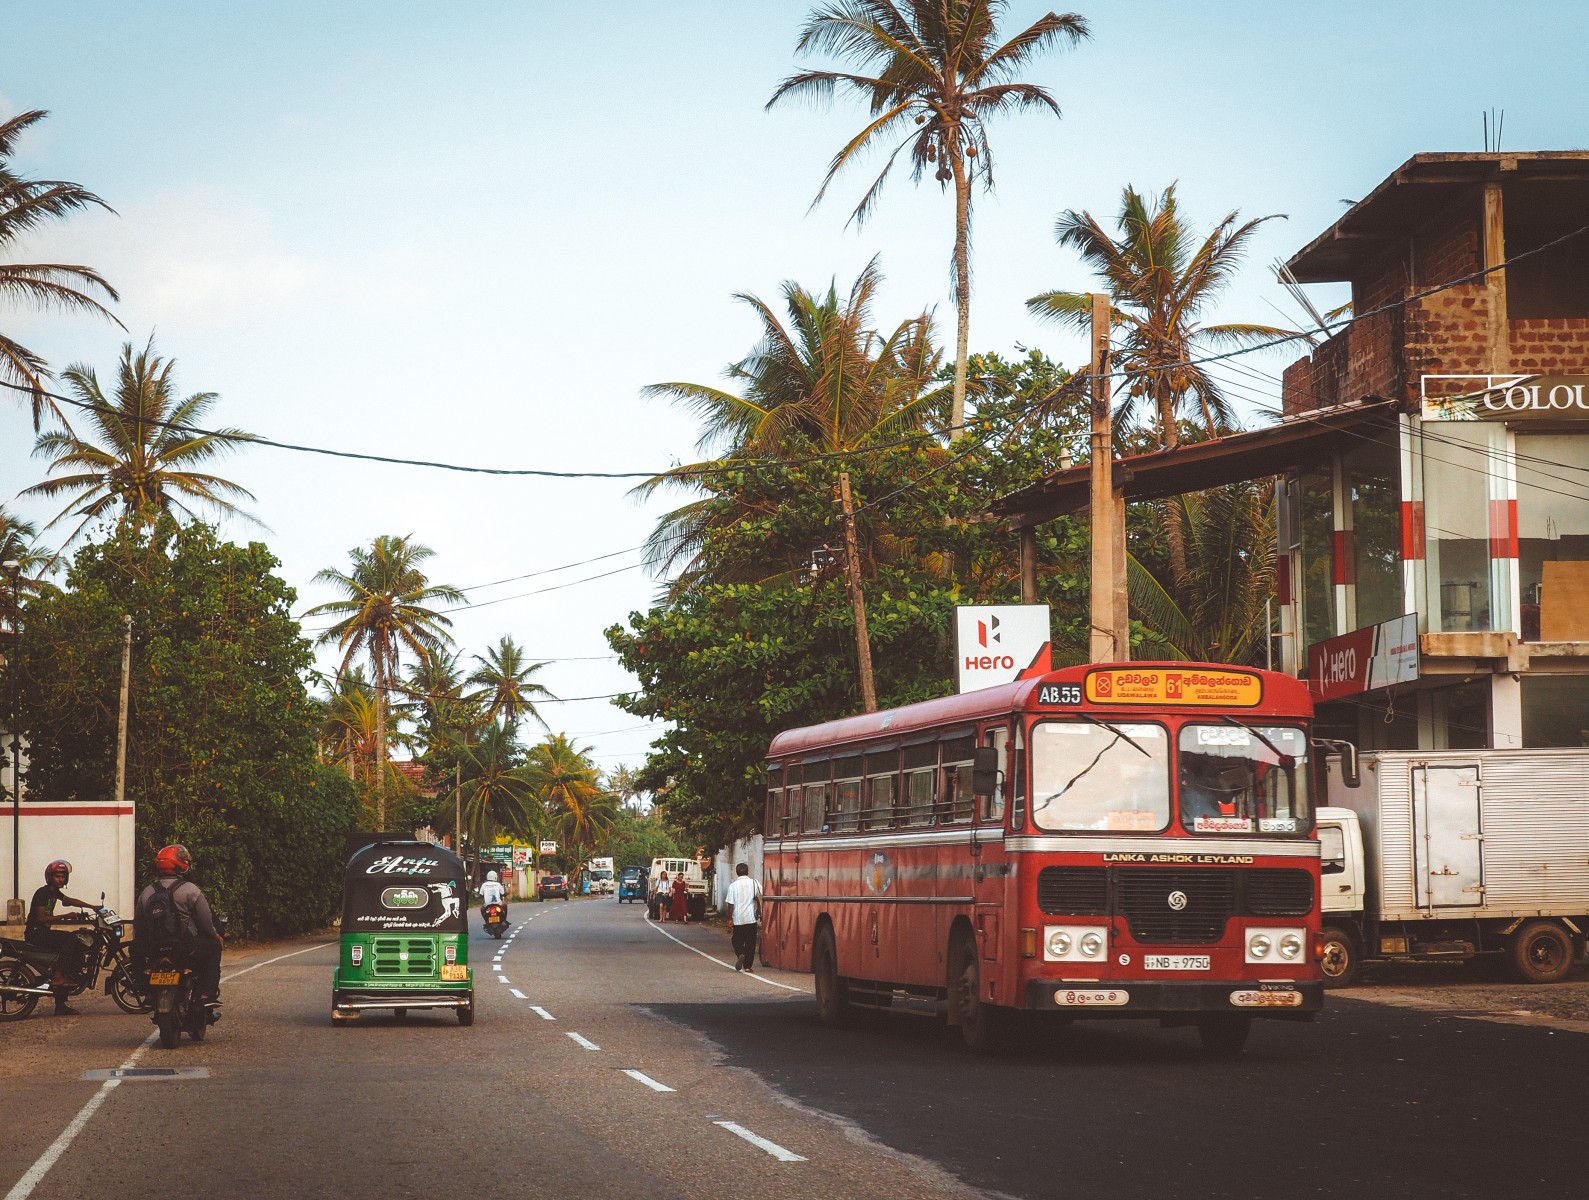 Colorful bus on the road in Sri Lanka